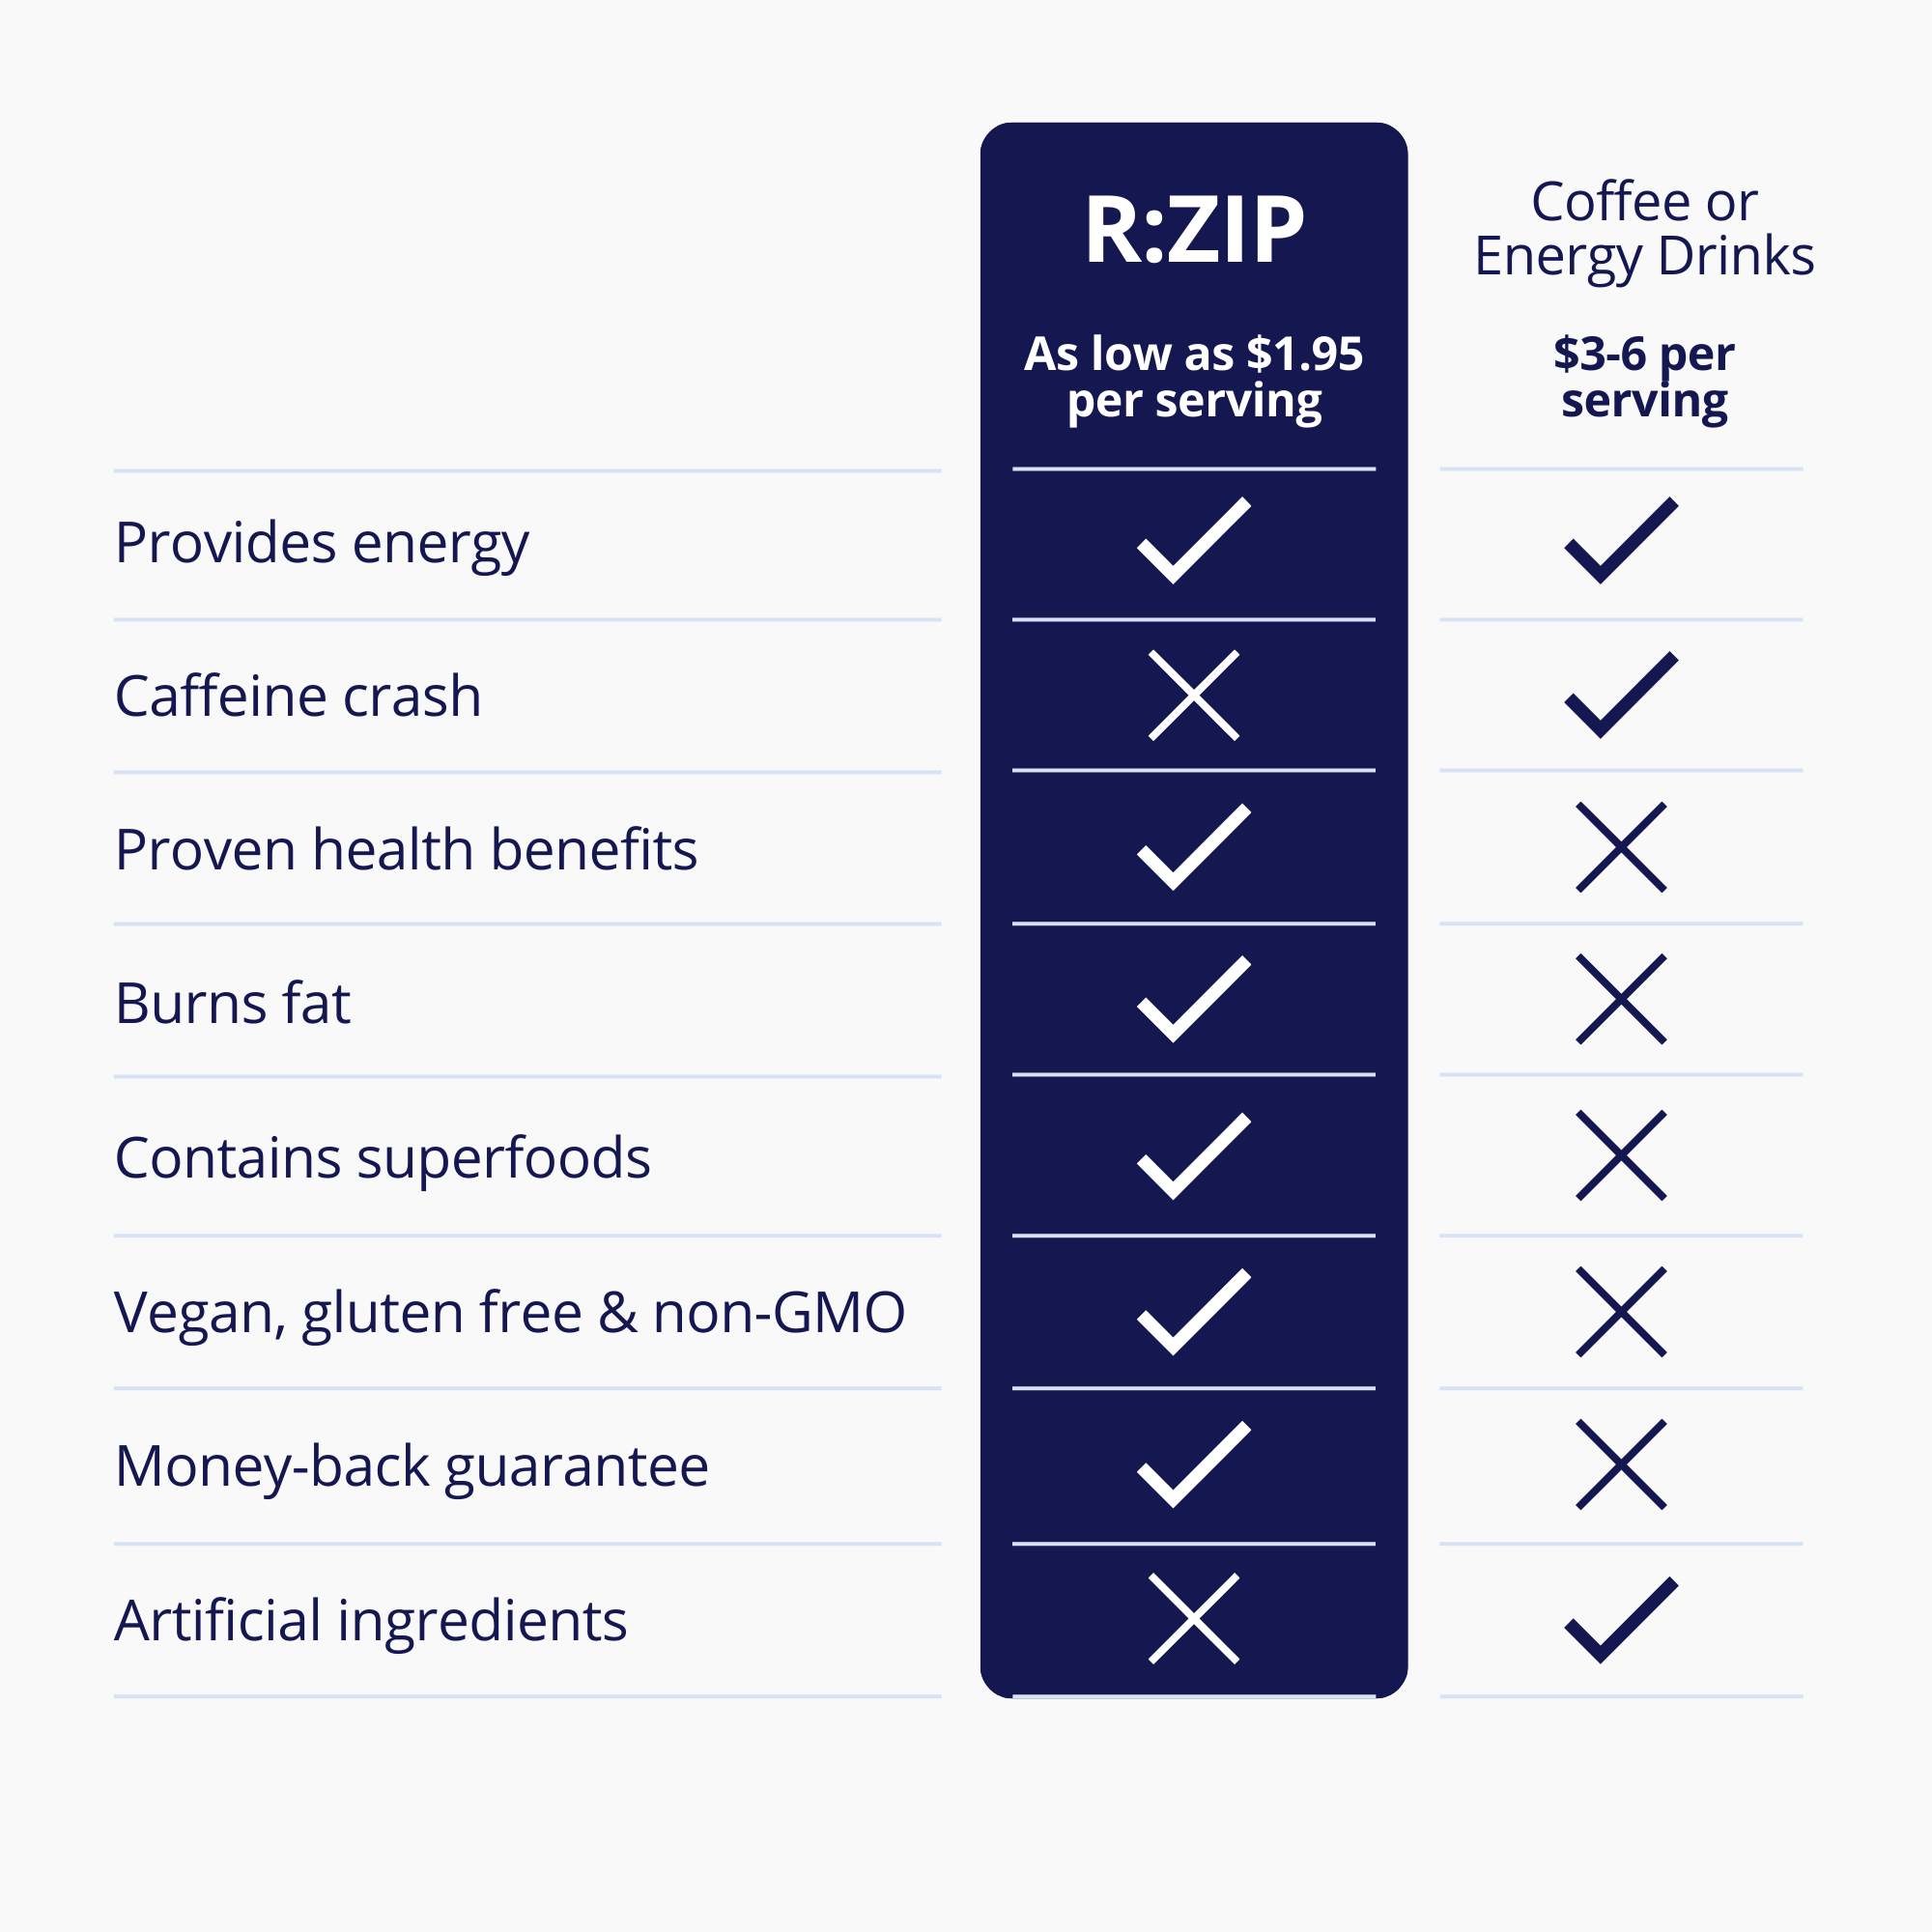 comparison of R:ZIP to energy drinks and coffee